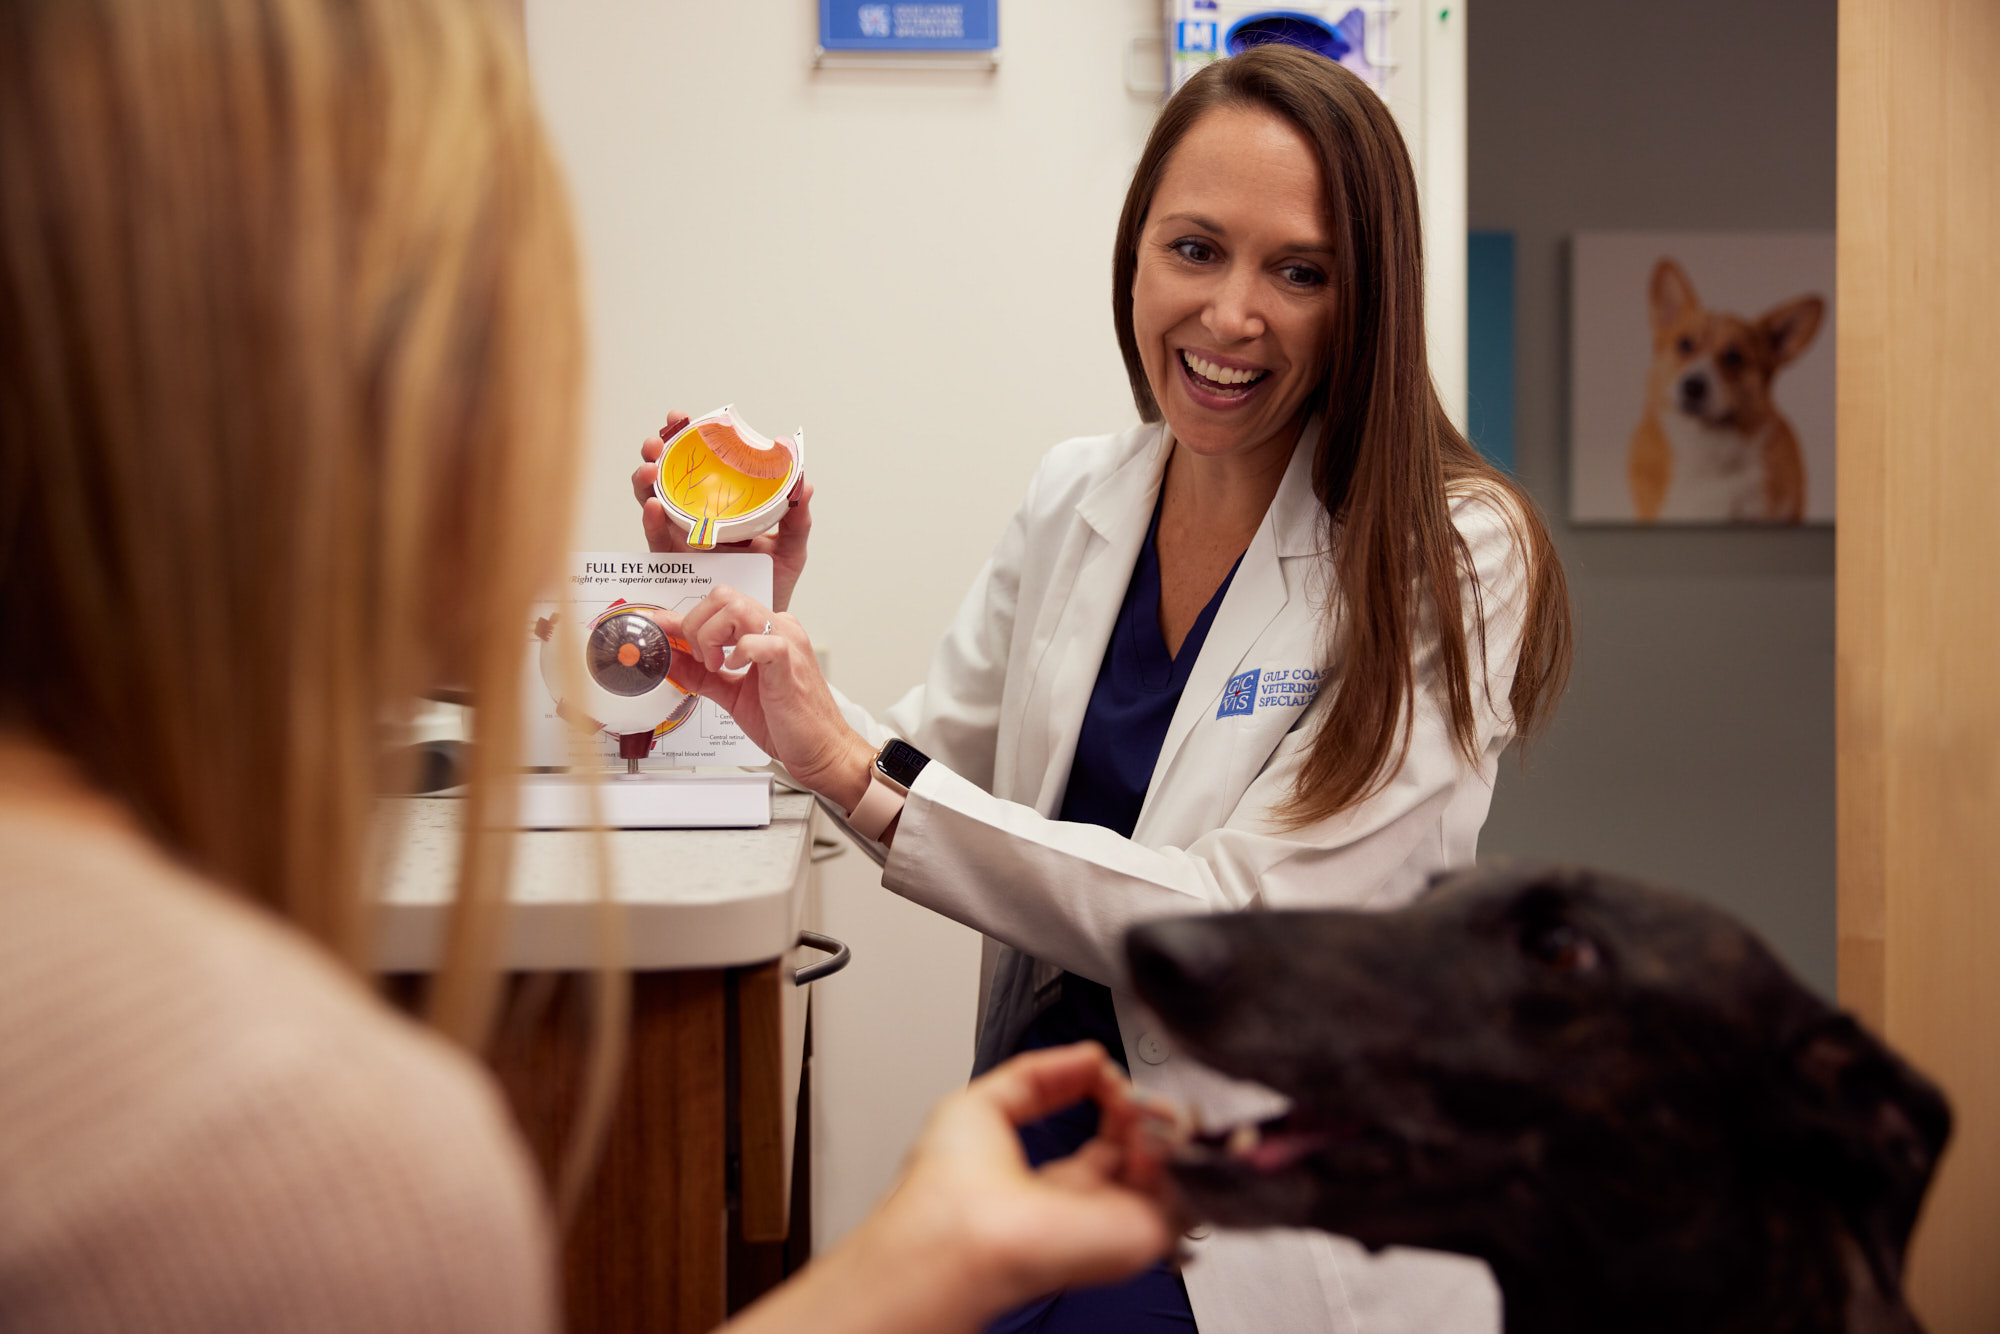 Smiling Veterinarian | Healthcare Lifestyle Photography